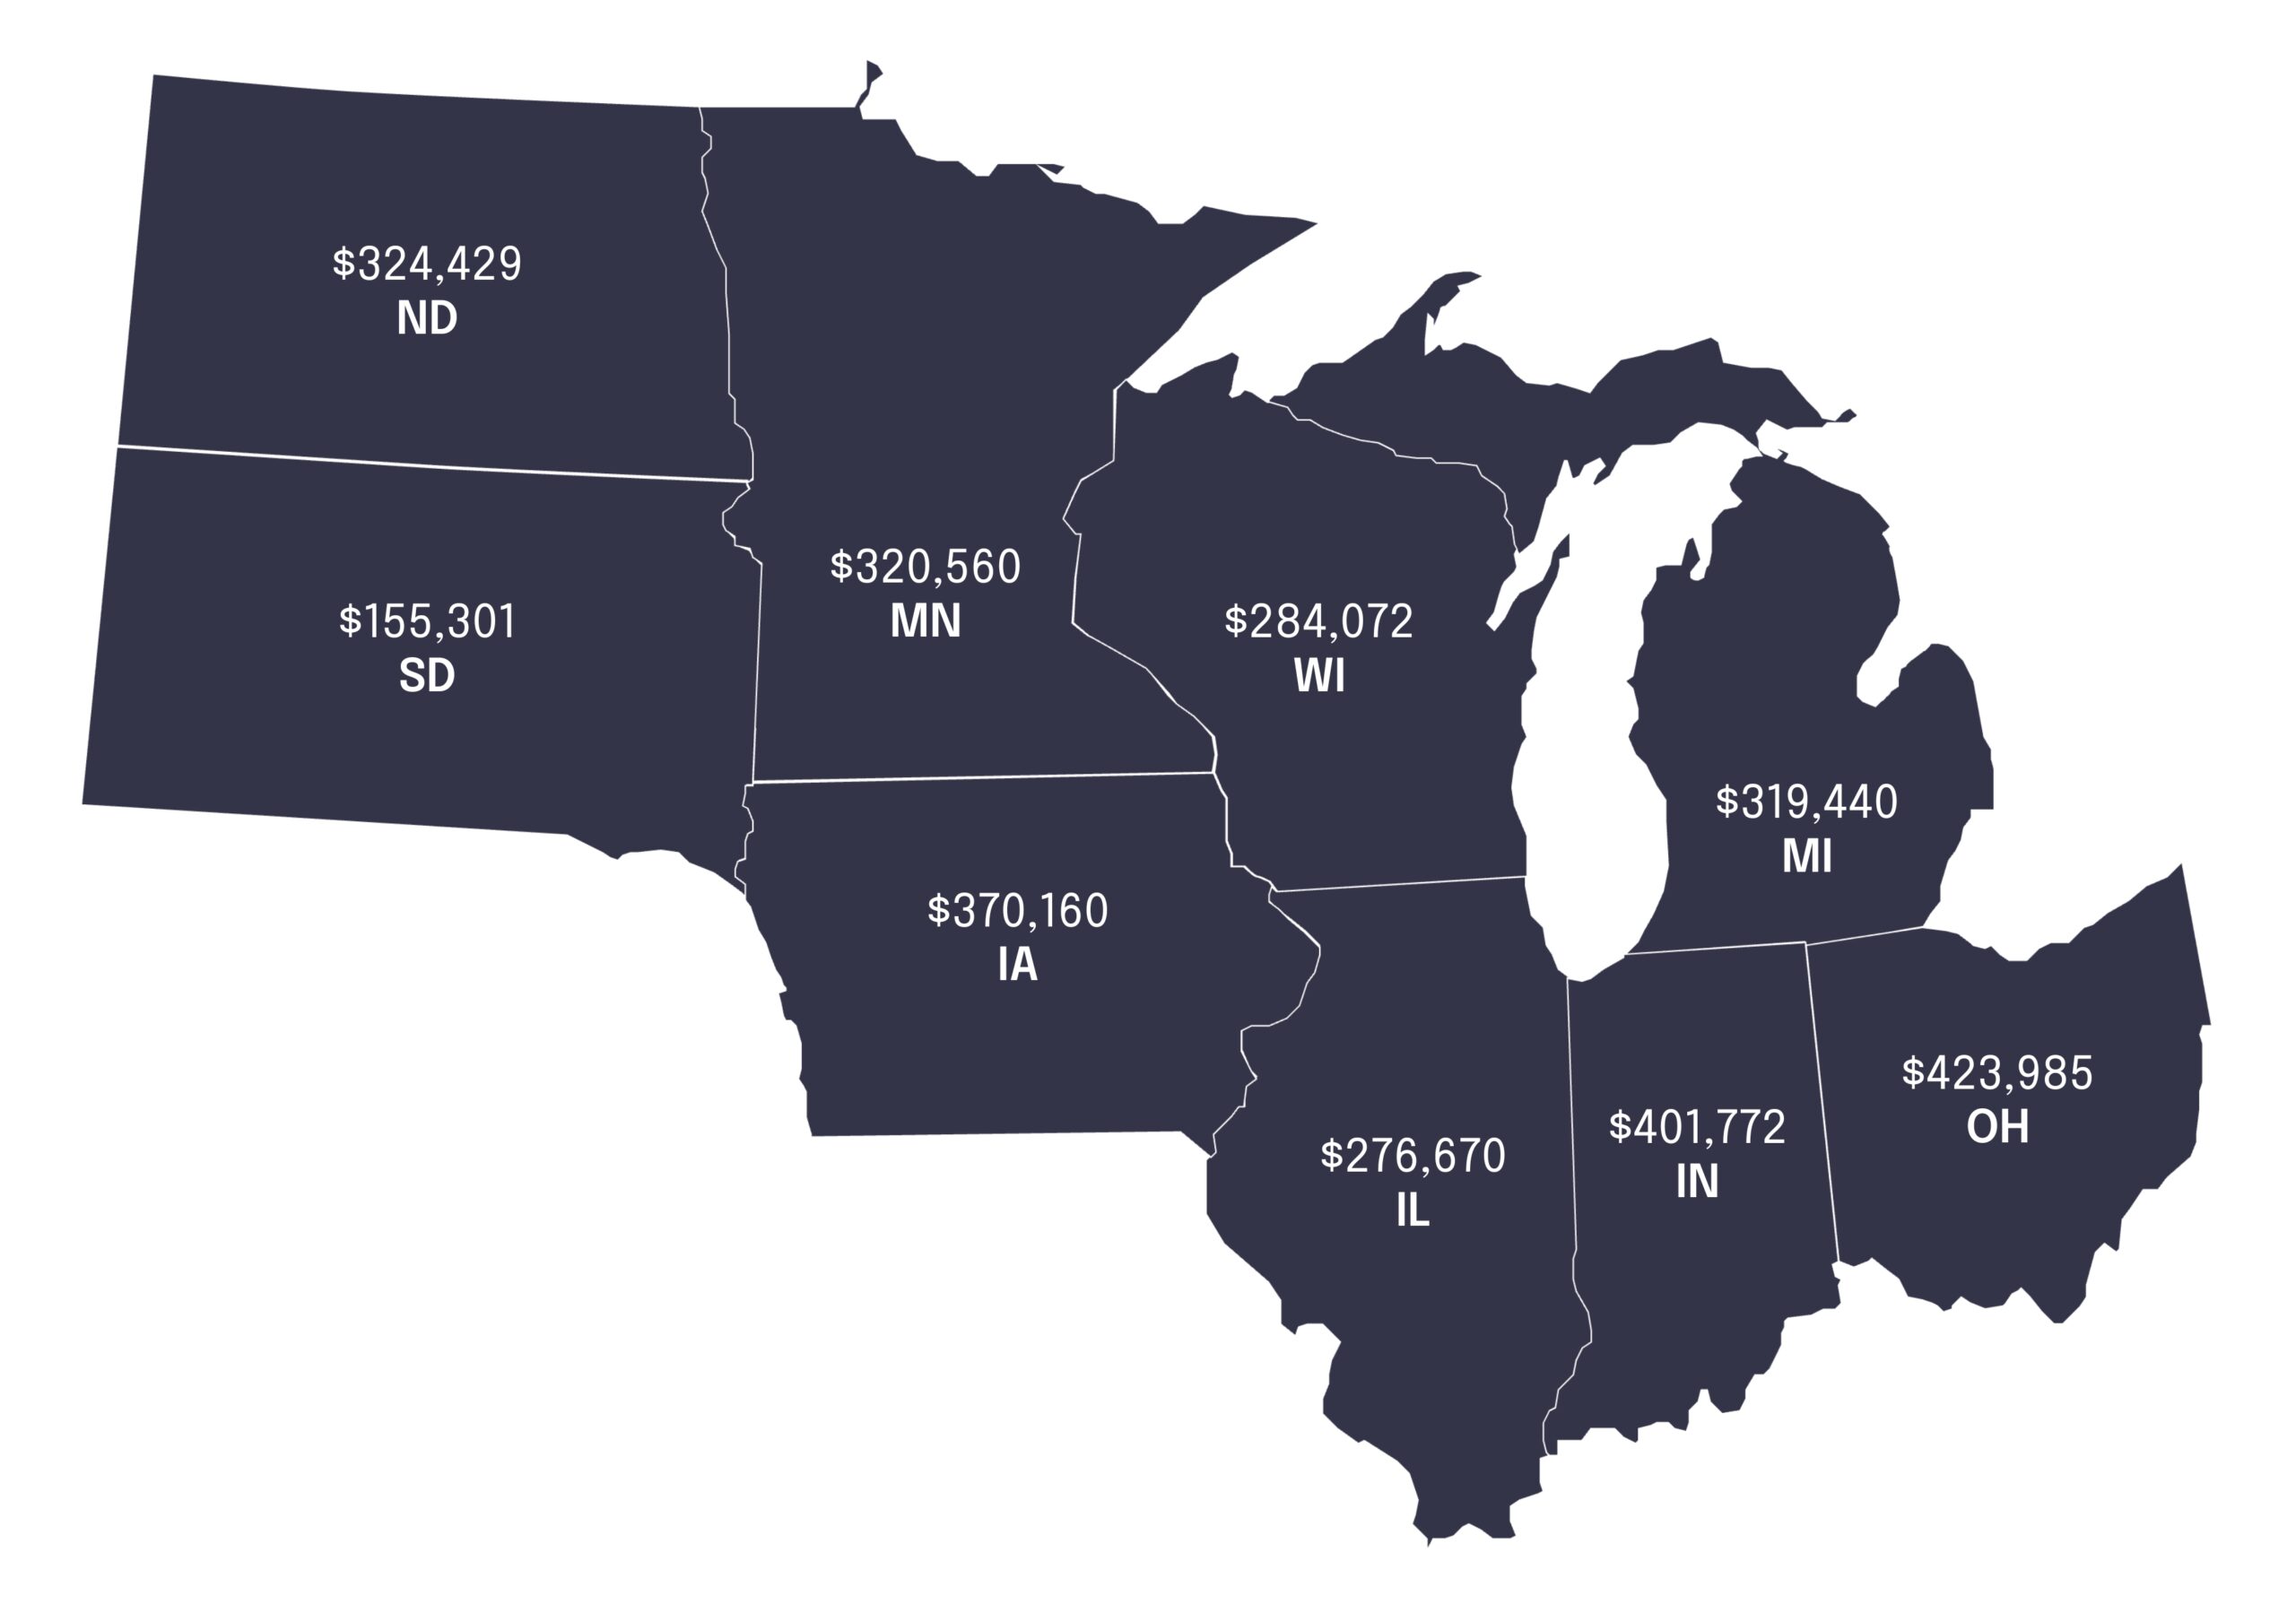 A map of the Arts Midwest region showing dollar signs for each state's 2023 return on investment